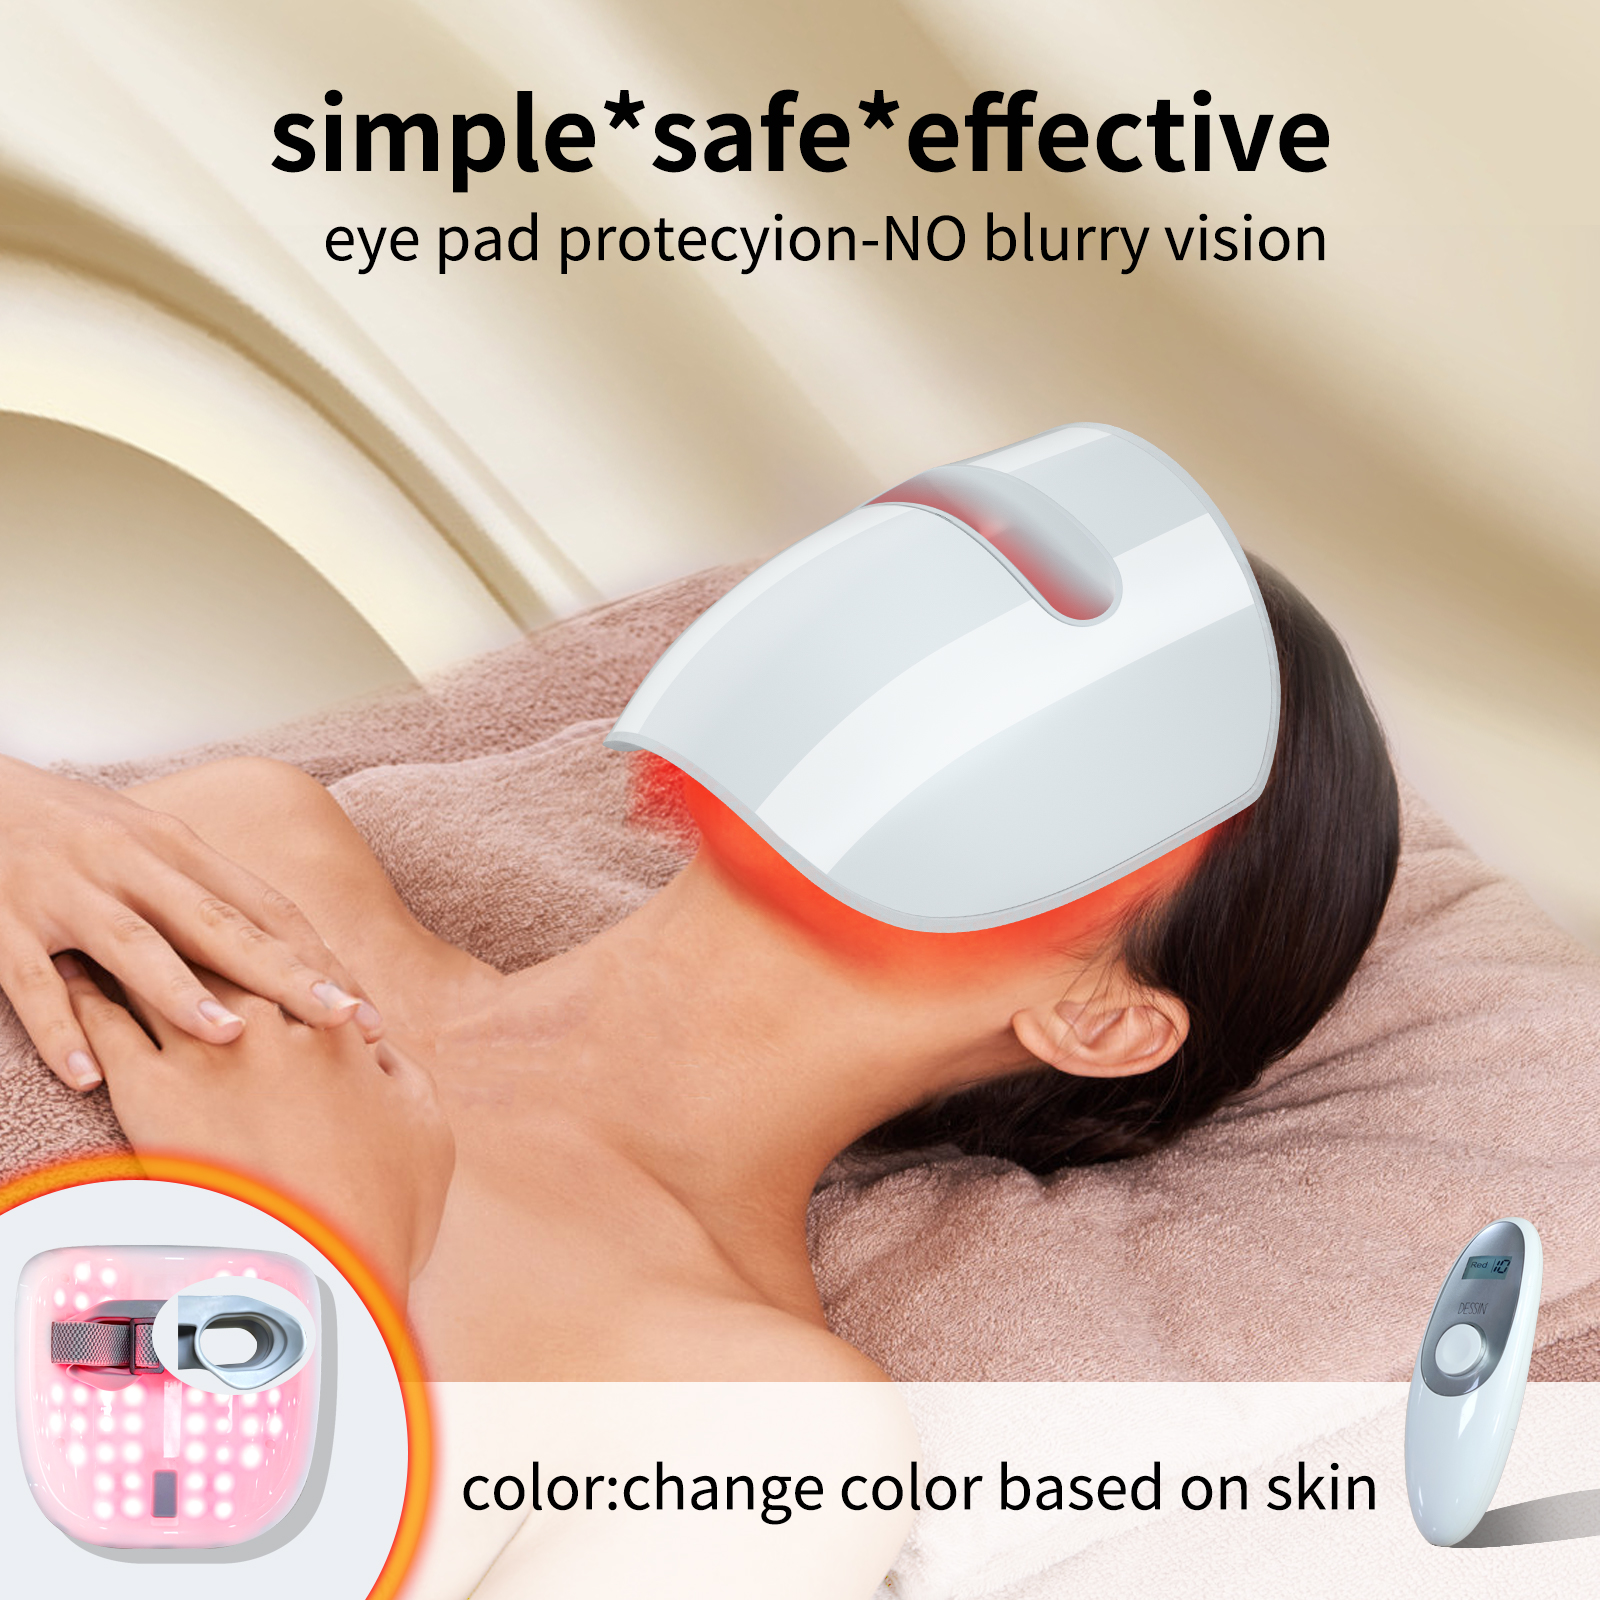 Infrared Red Led Light Therapy PDT Luminous Face Photon Mask Therapy with Facial Skin Beauty Mask Led Light Device Korea Manufacturers, Infrared Red Led Light Therapy PDT Luminous Face Photon Mask Therapy with Facial Skin Beauty Mask Led Light Device Korea Factory, Supply Infrared Red Led Light Therapy PDT Luminous Face Photon Mask Therapy with Facial Skin Beauty Mask Led Light Device Korea